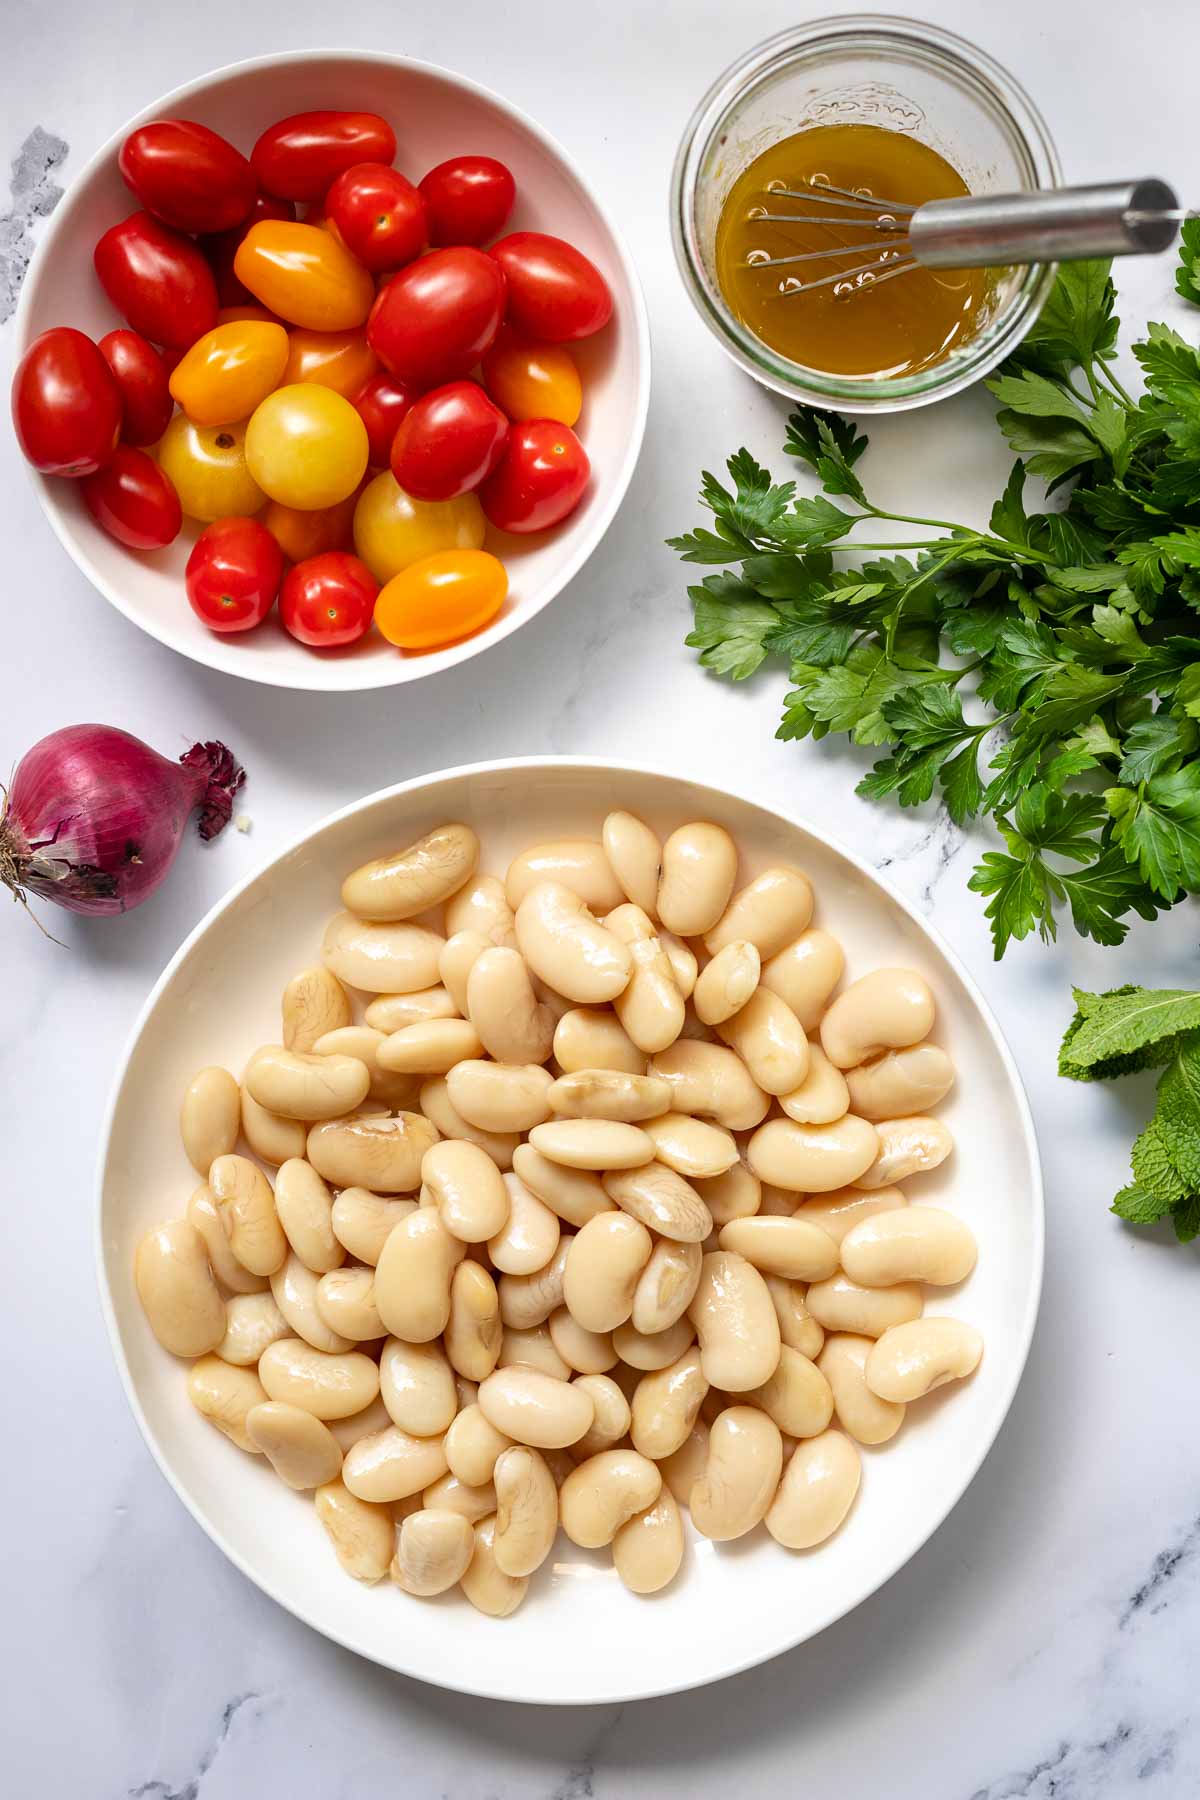 Ingredients for Italian White Bean Salad with Tomatoes